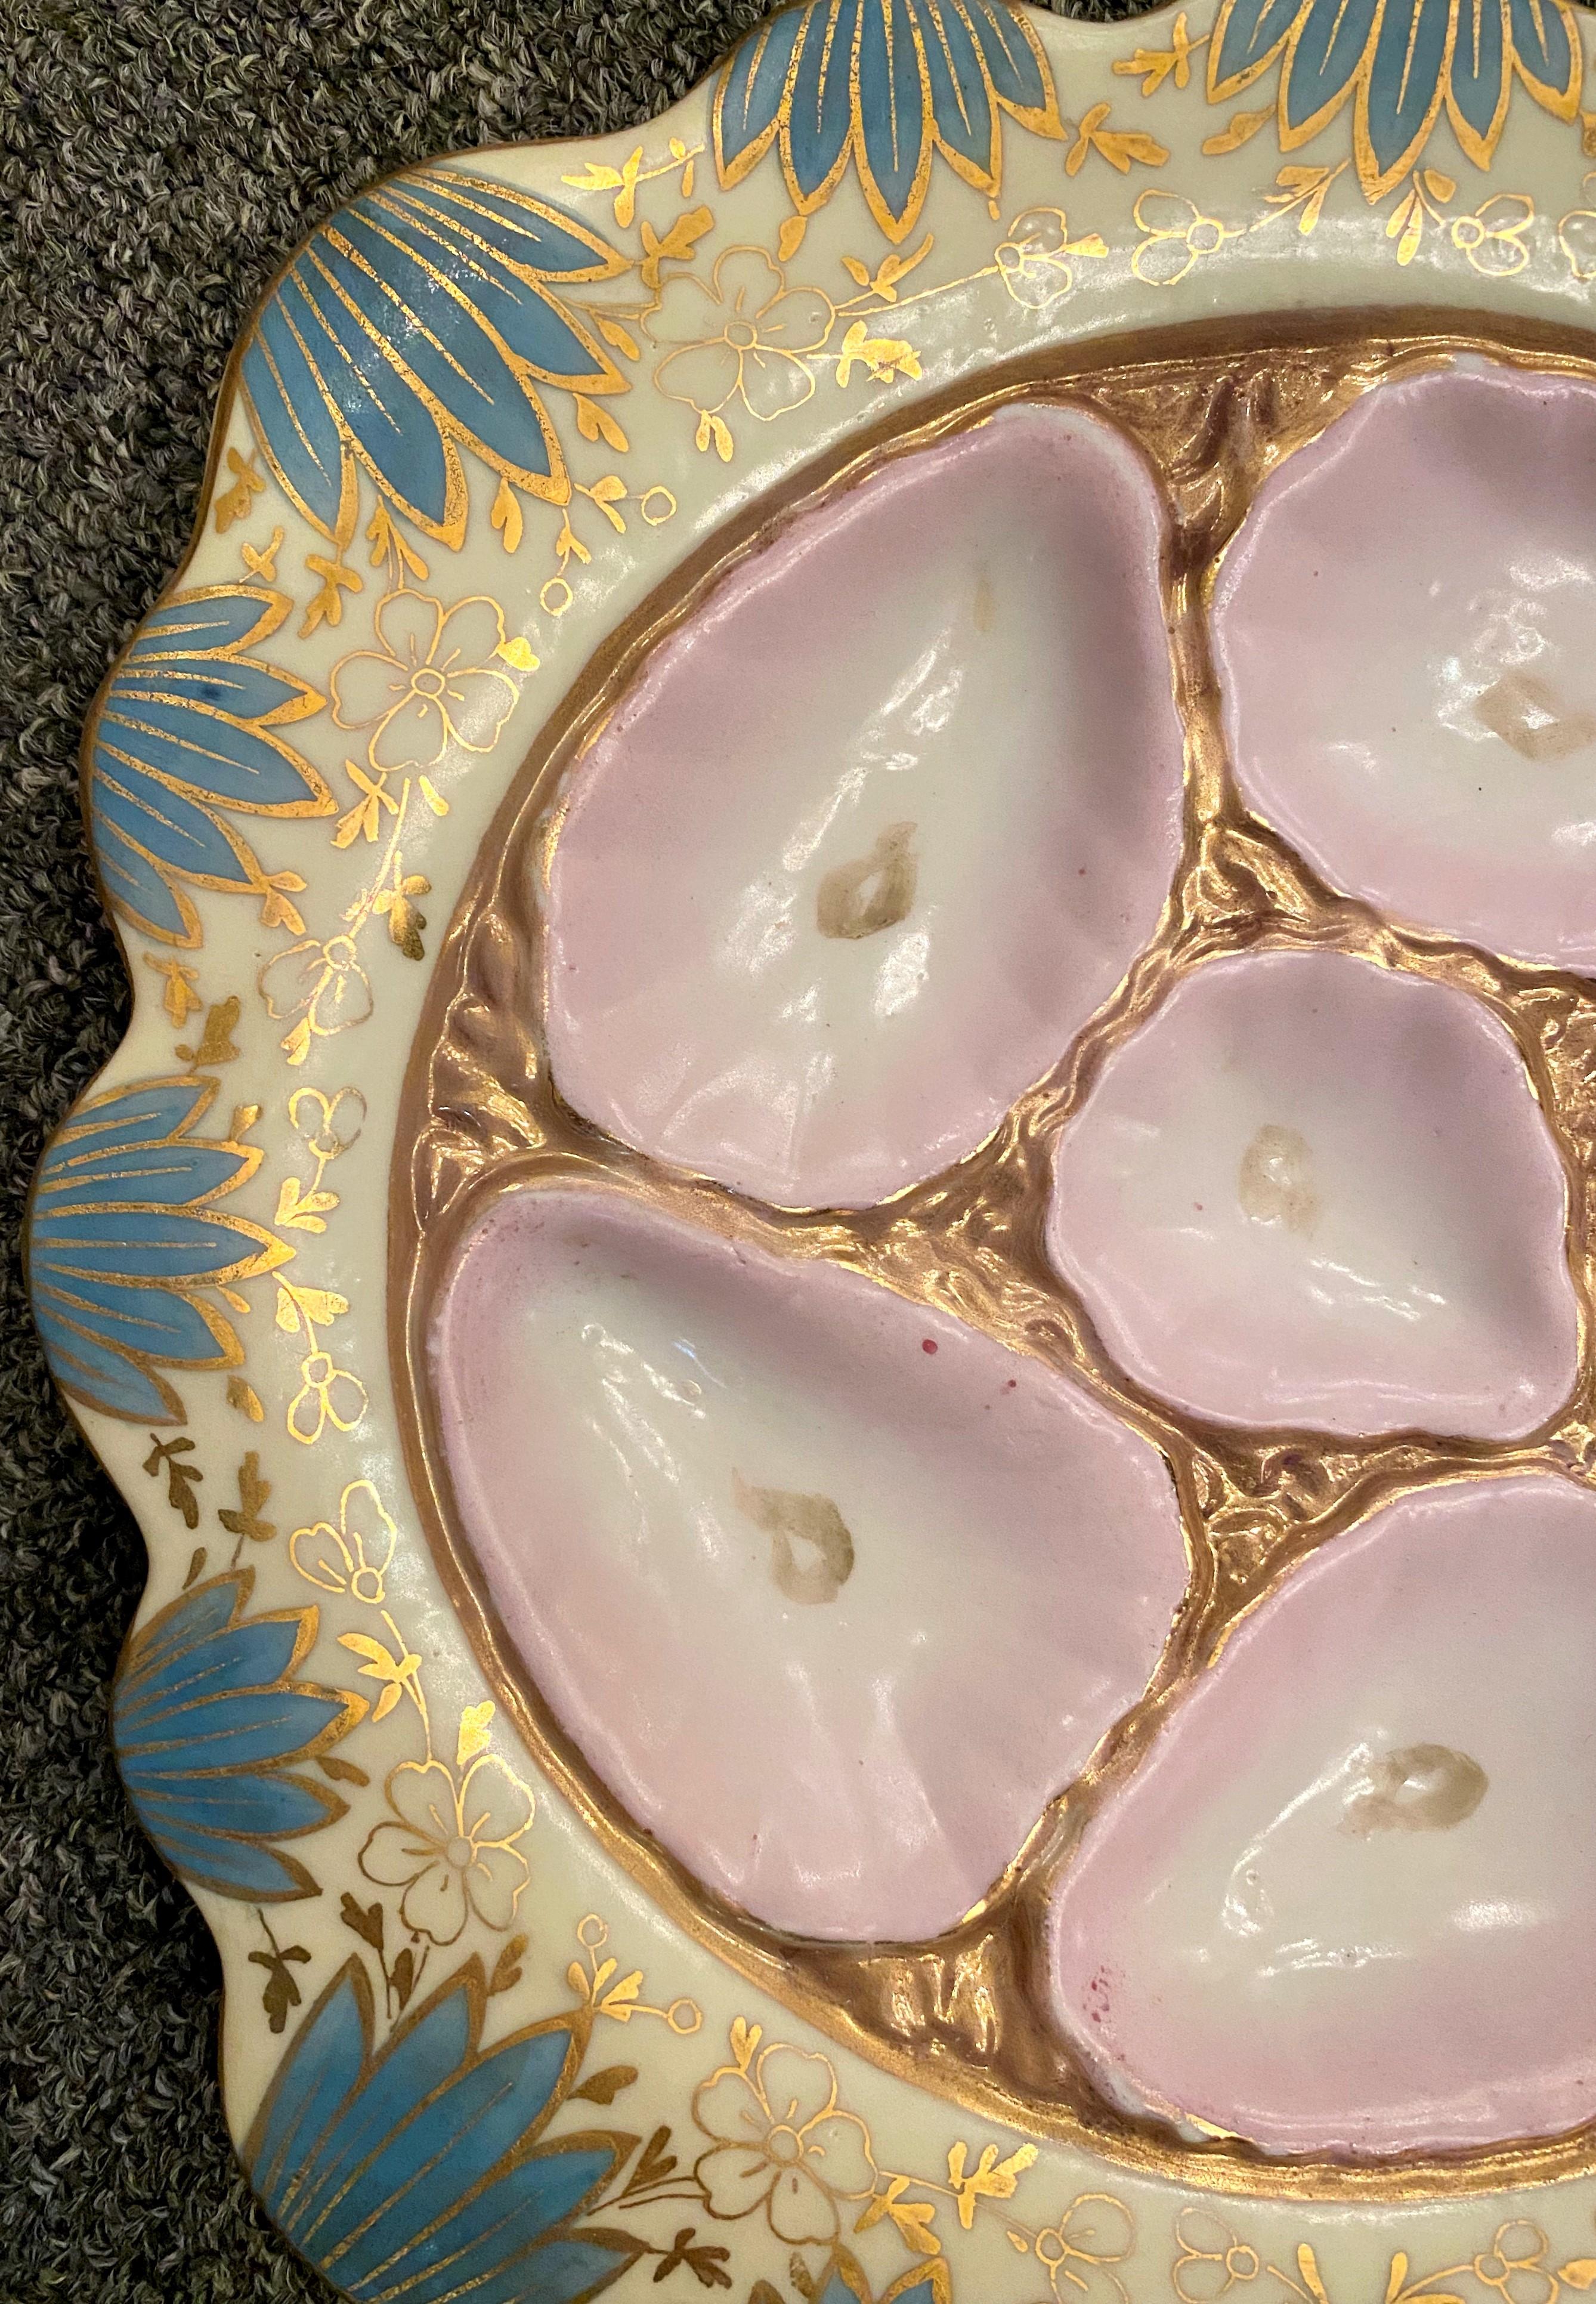 Antique German hand painted porcelain oyster plate, circa 1880s.